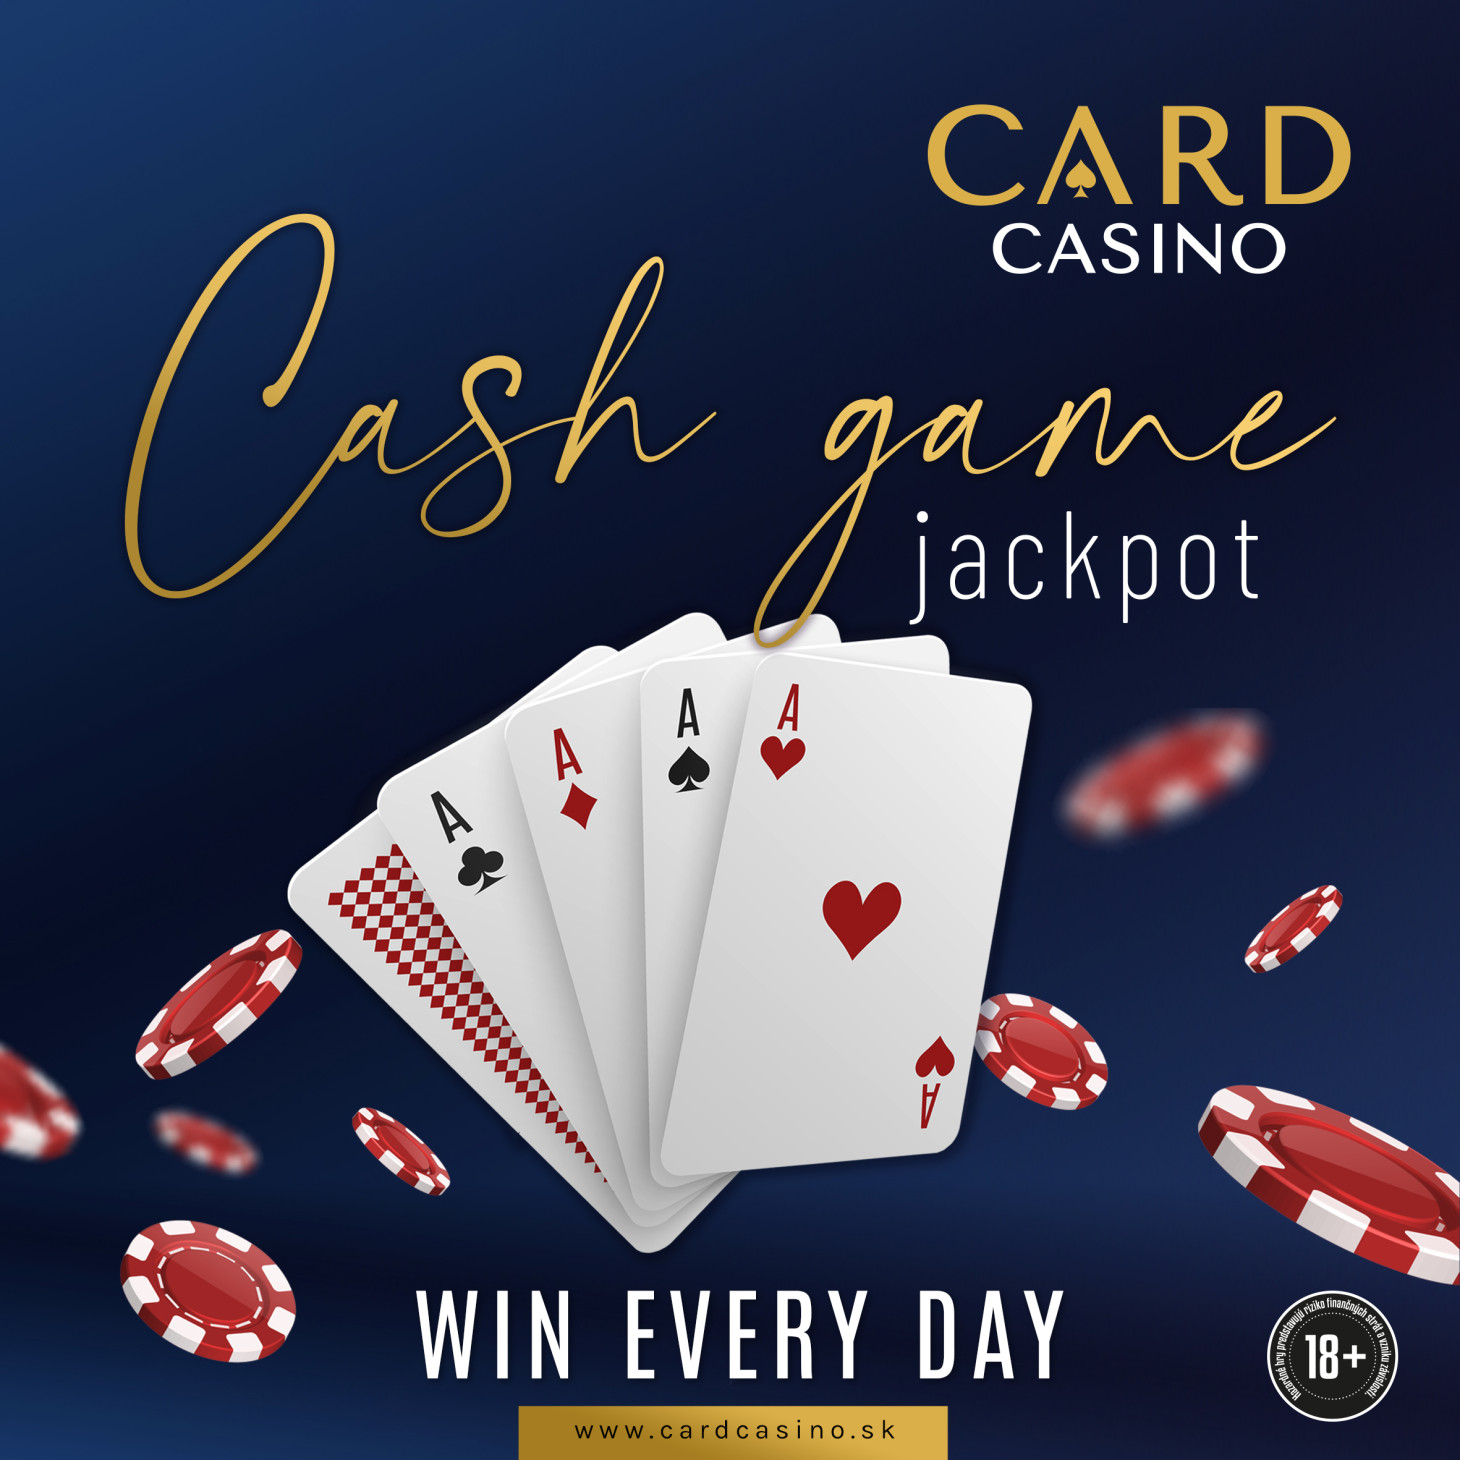 Come to play Cash game to Card Casino, where generous jackpots await you